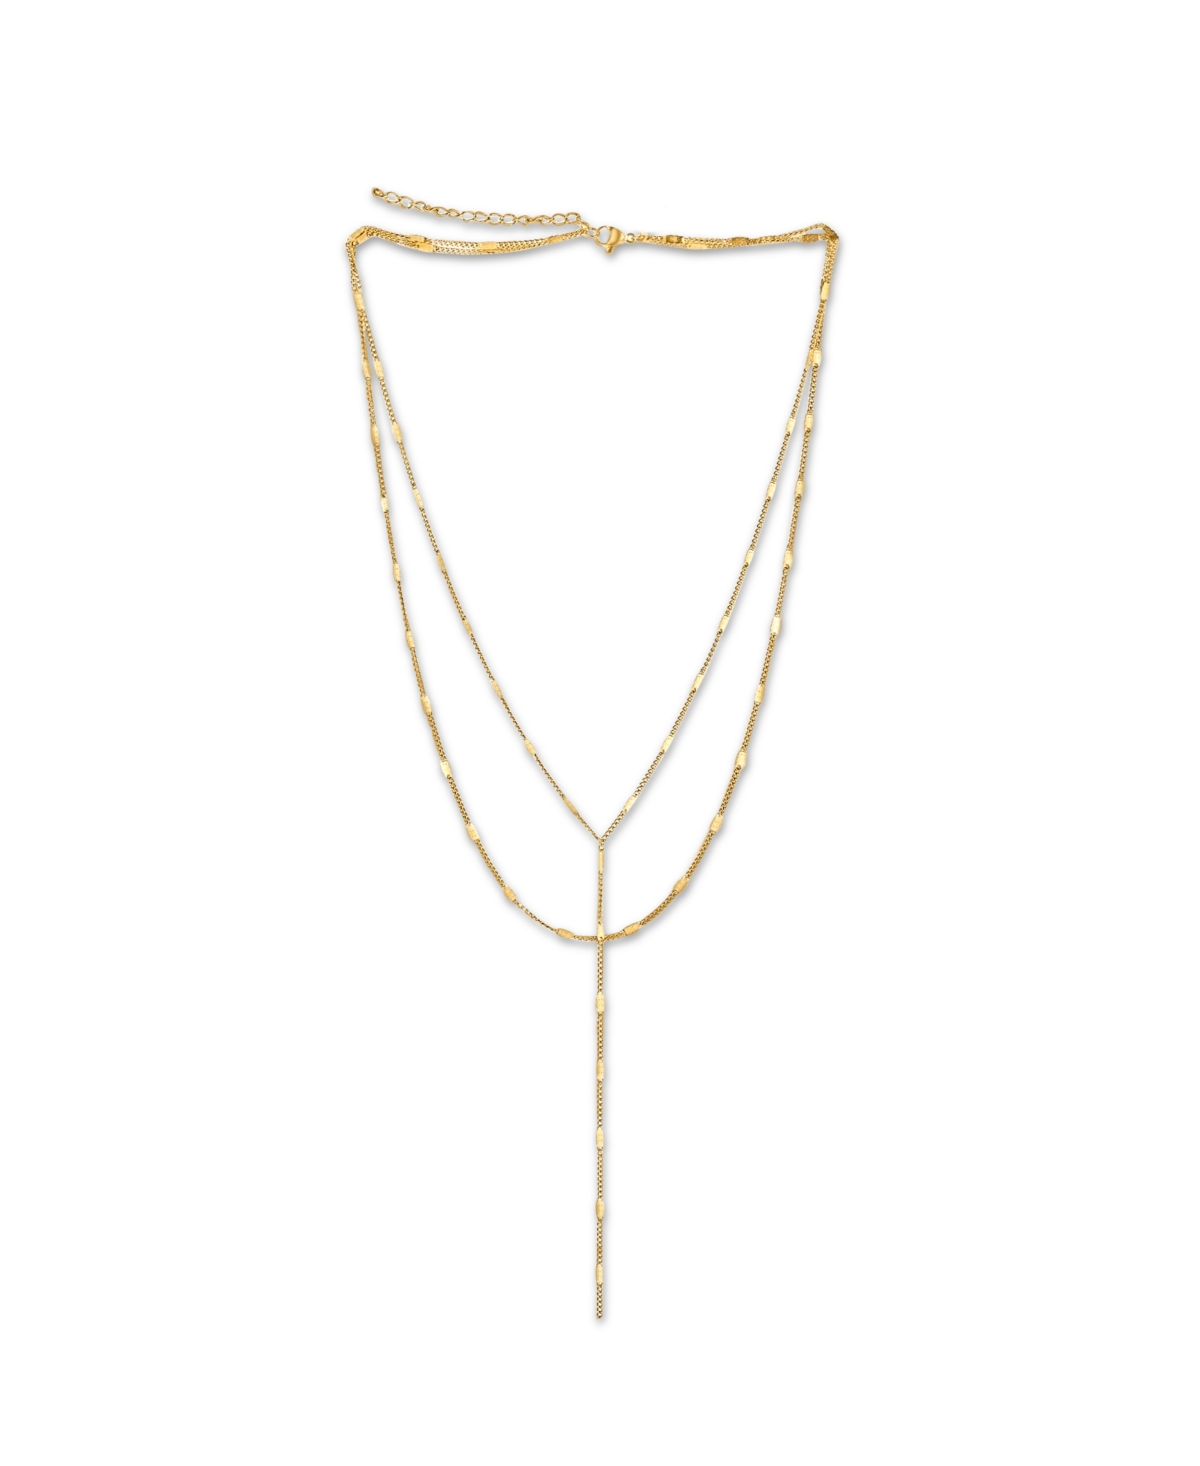 Camilla Dainty Lariat Chain Necklace - Gold